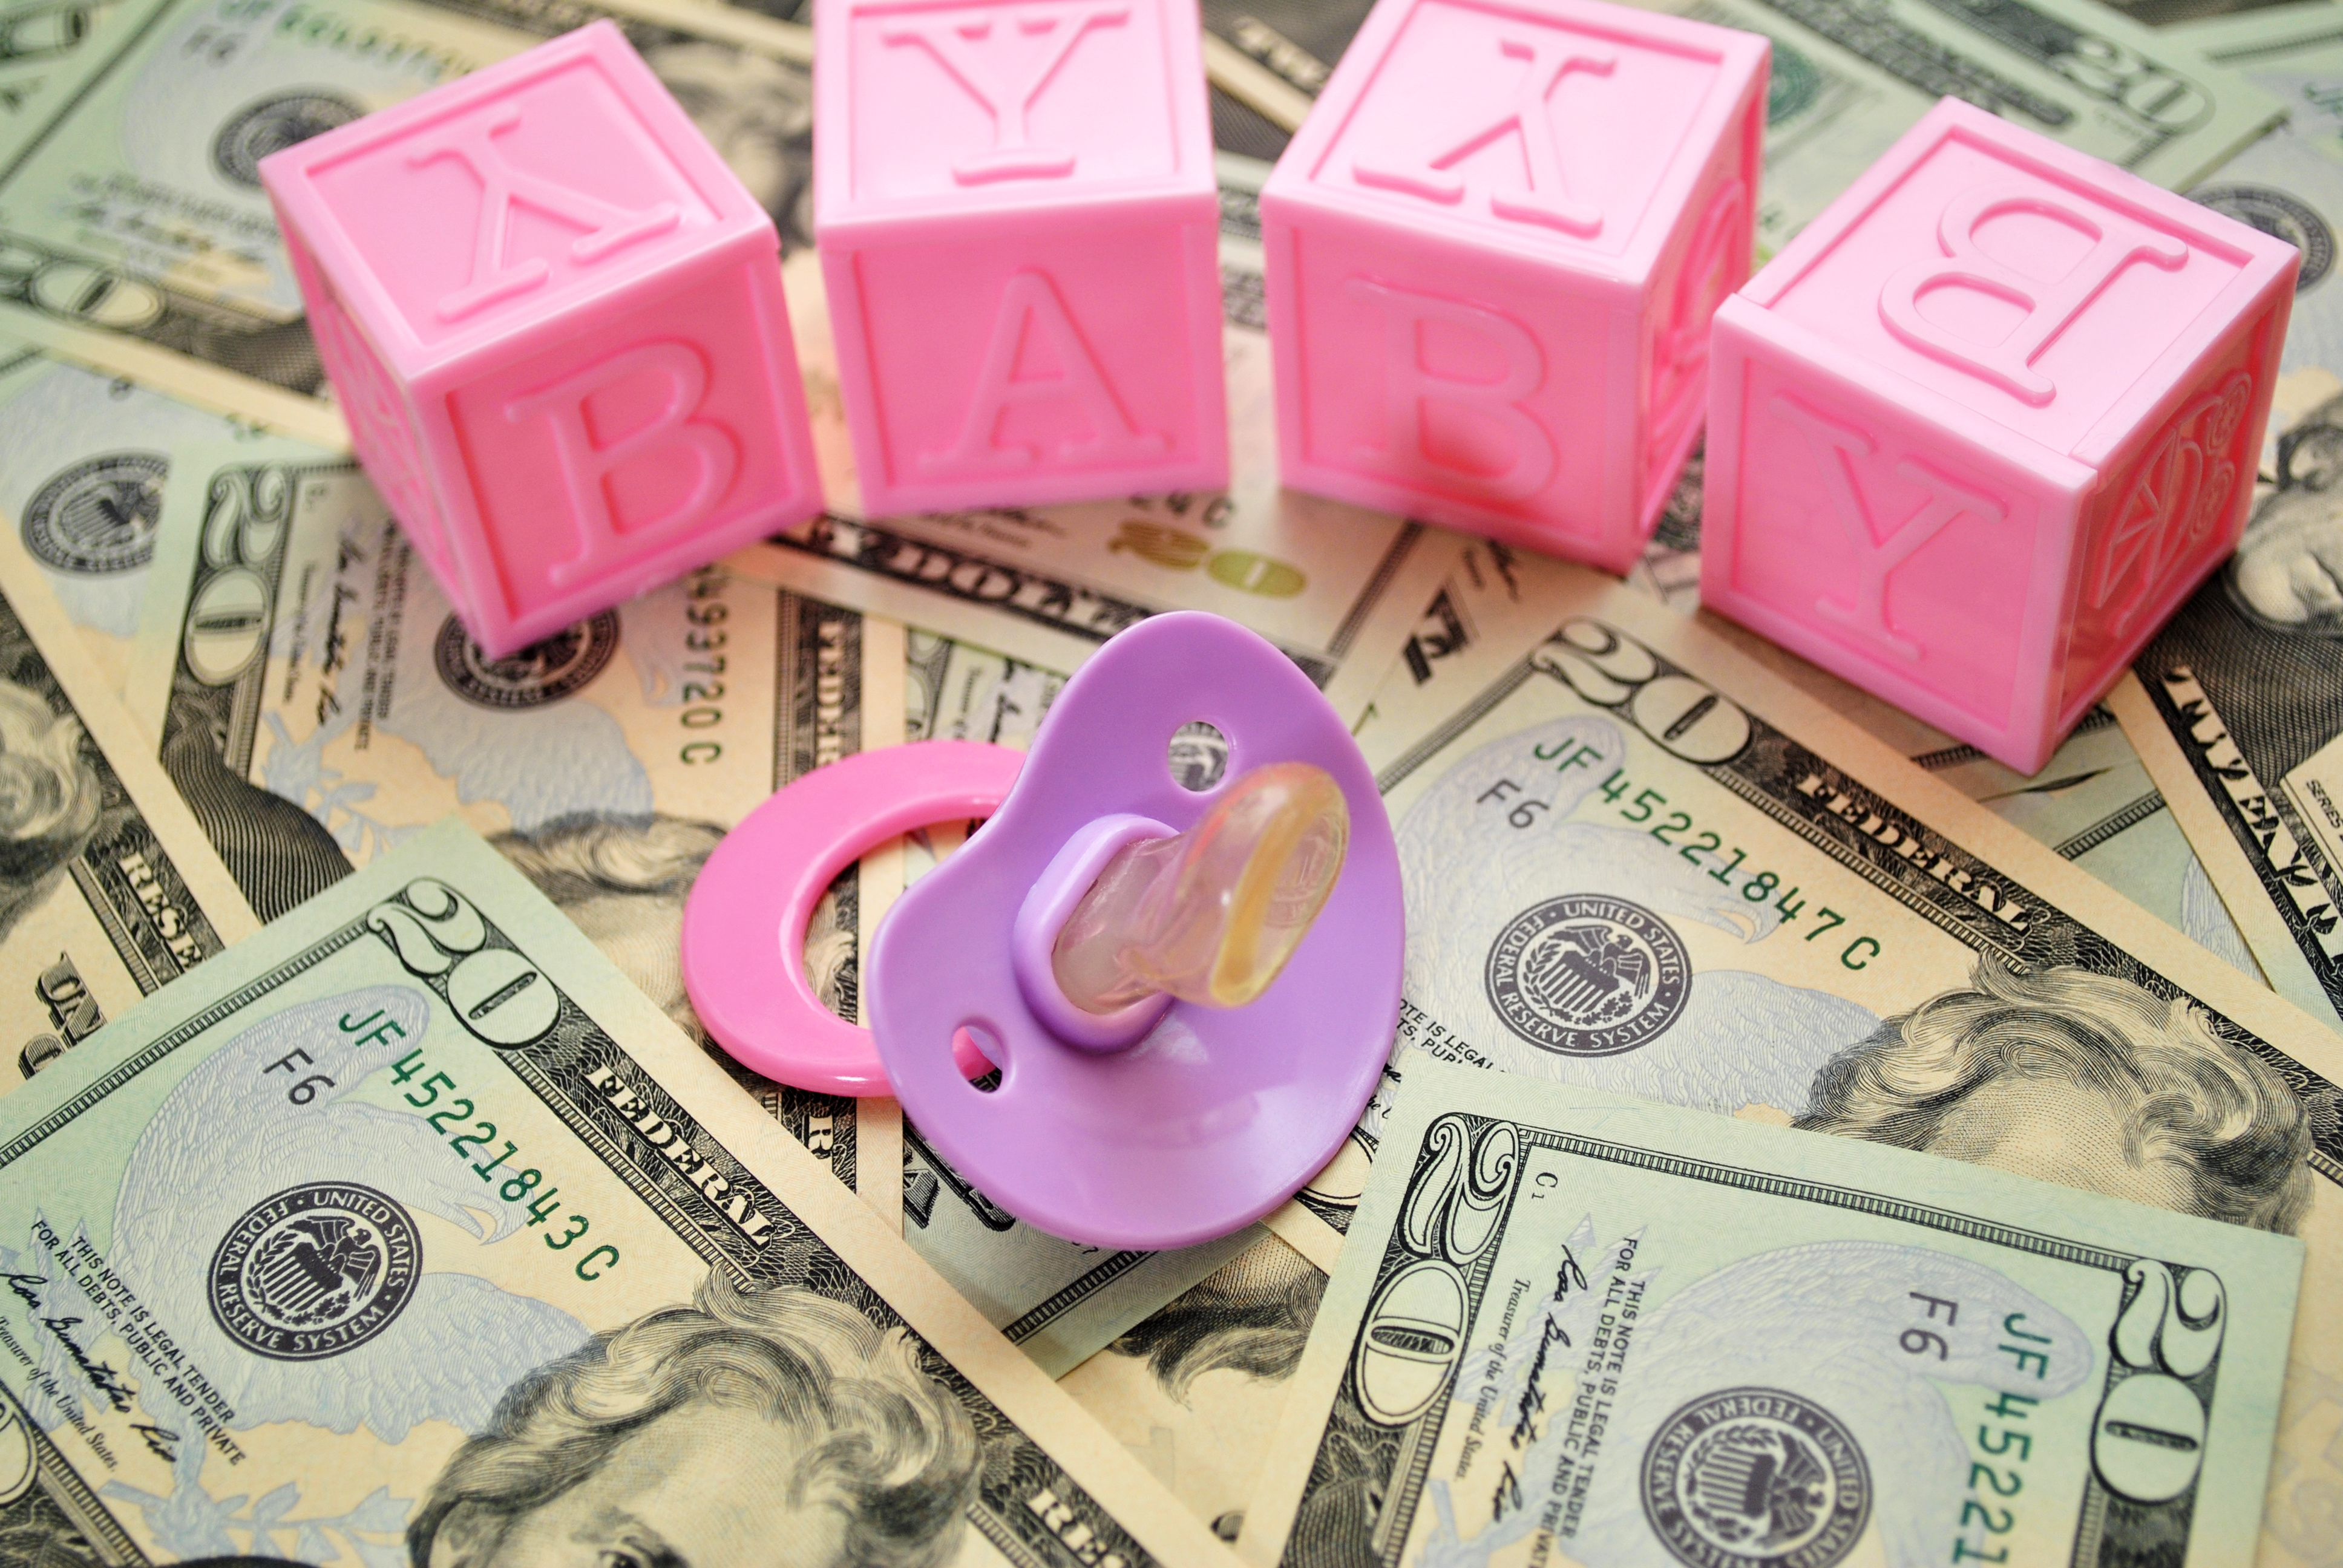 Pink Blocks and a Pacifier on $20 American Bills